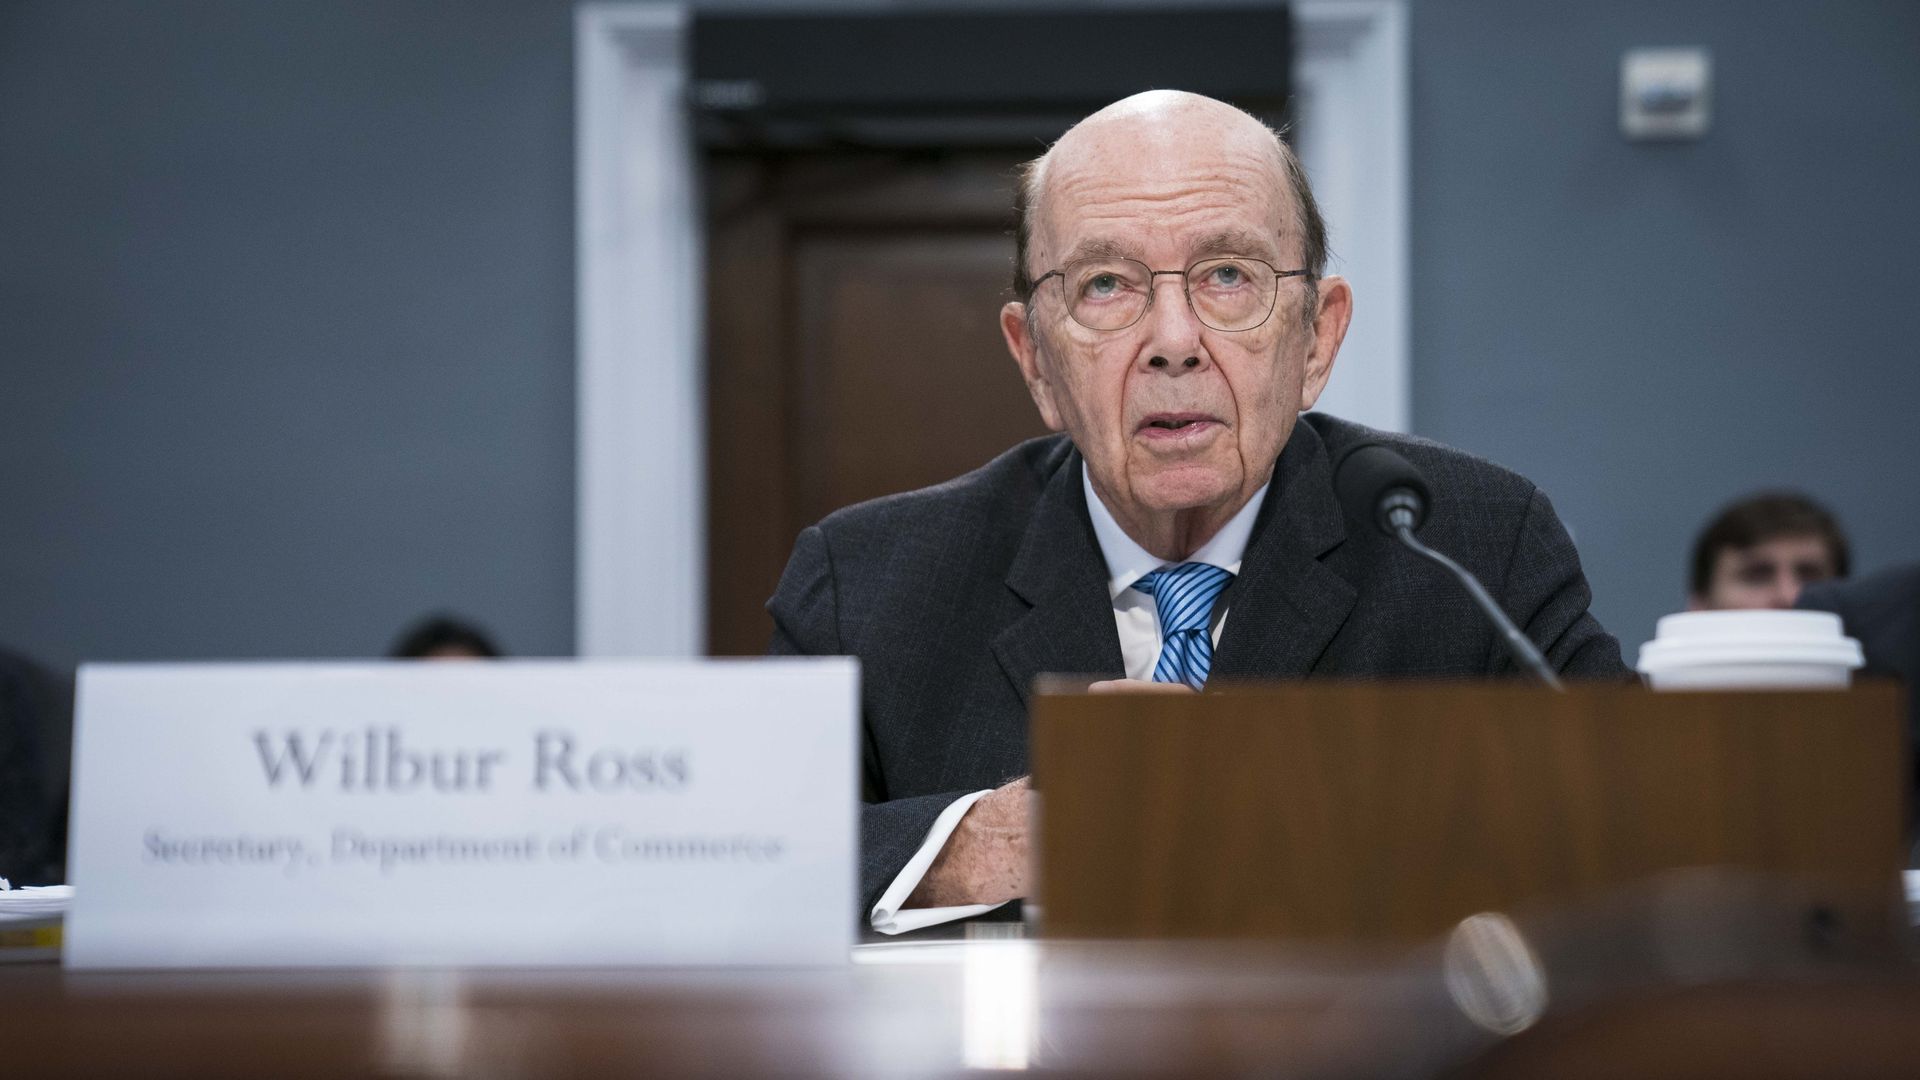 Wilbur Ross, U.S. commerce secretary, testifies before the House Committee on Appropriations in Washington, D.C., U.S., on Tuesday, March 10, 2020